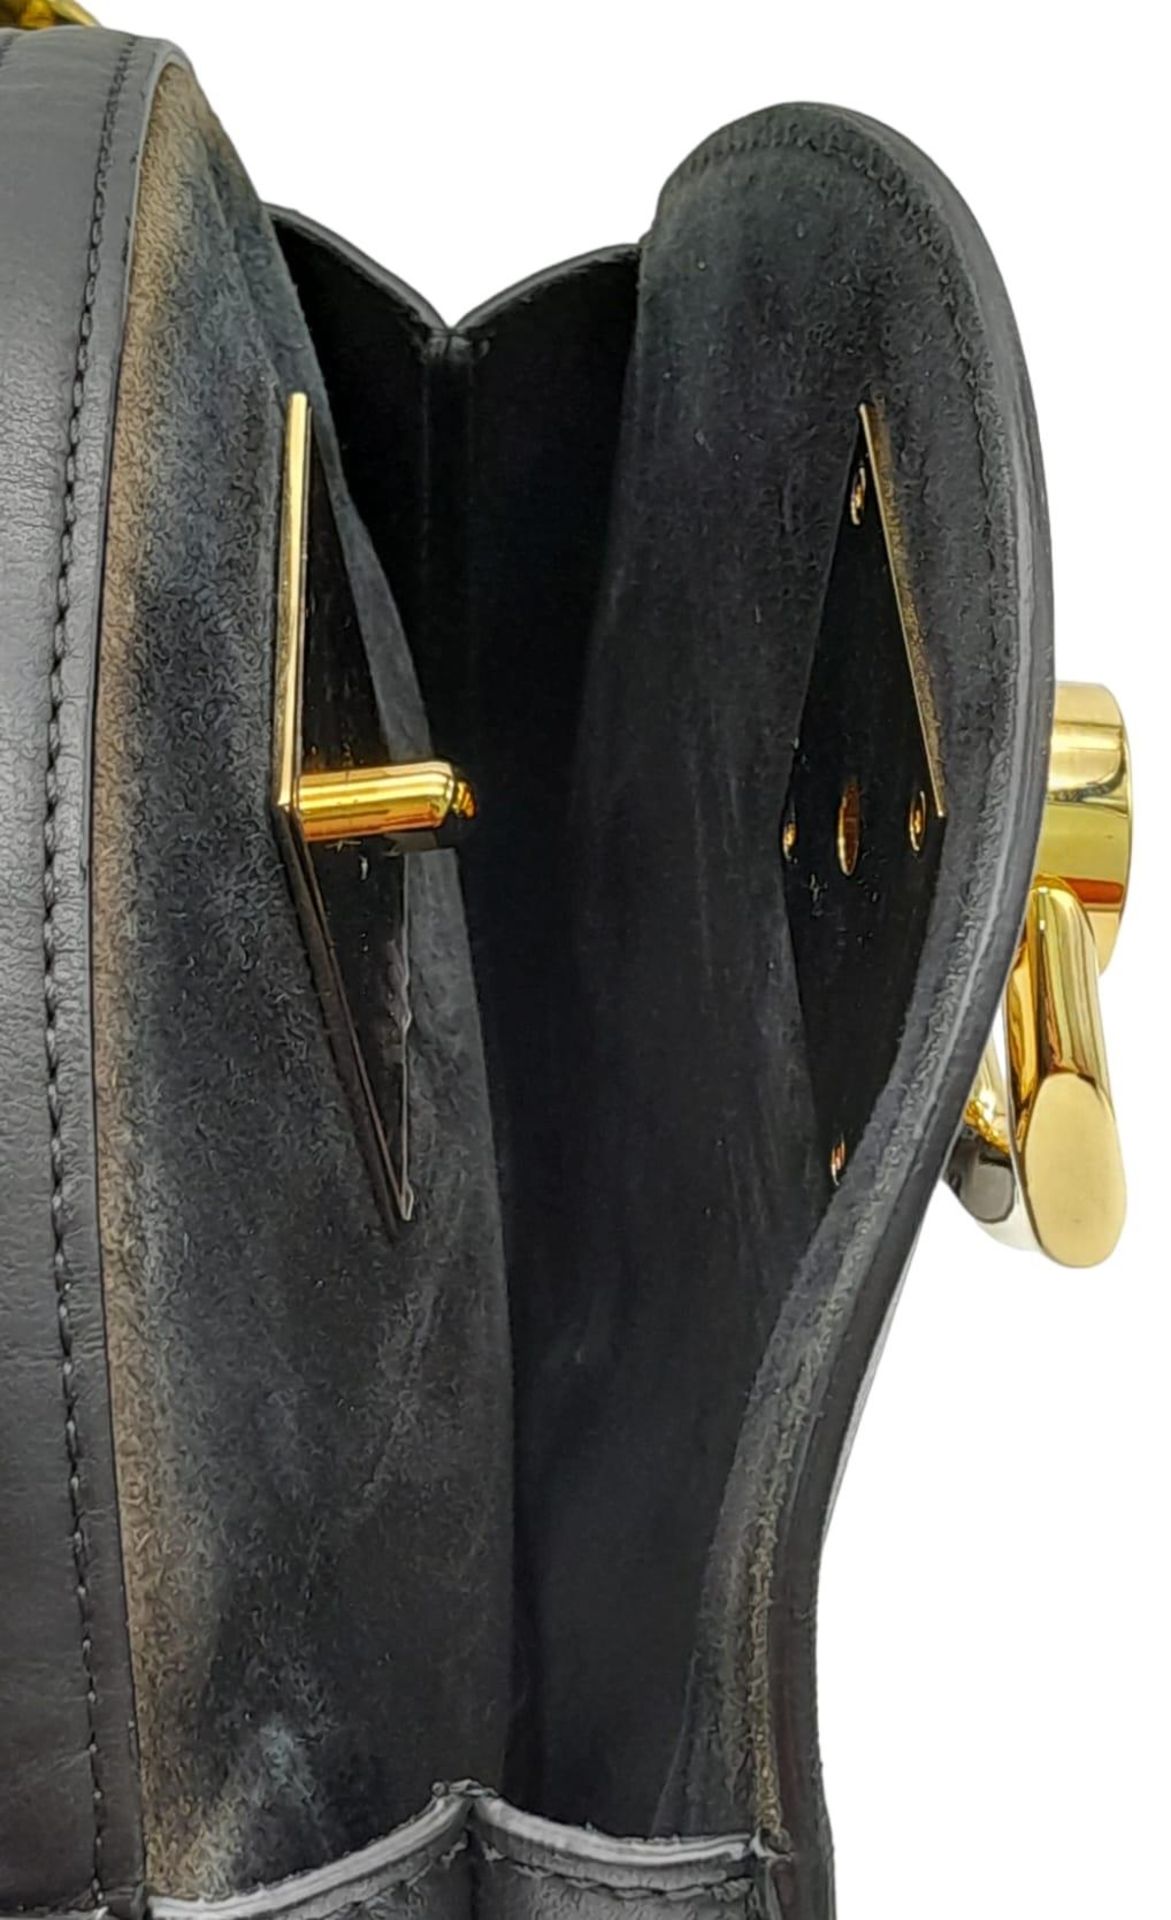 A Balmain Black 'Twist' Crossbody Bag. Leather exterior, with gold-tone hardware and zipper and - Image 4 of 10